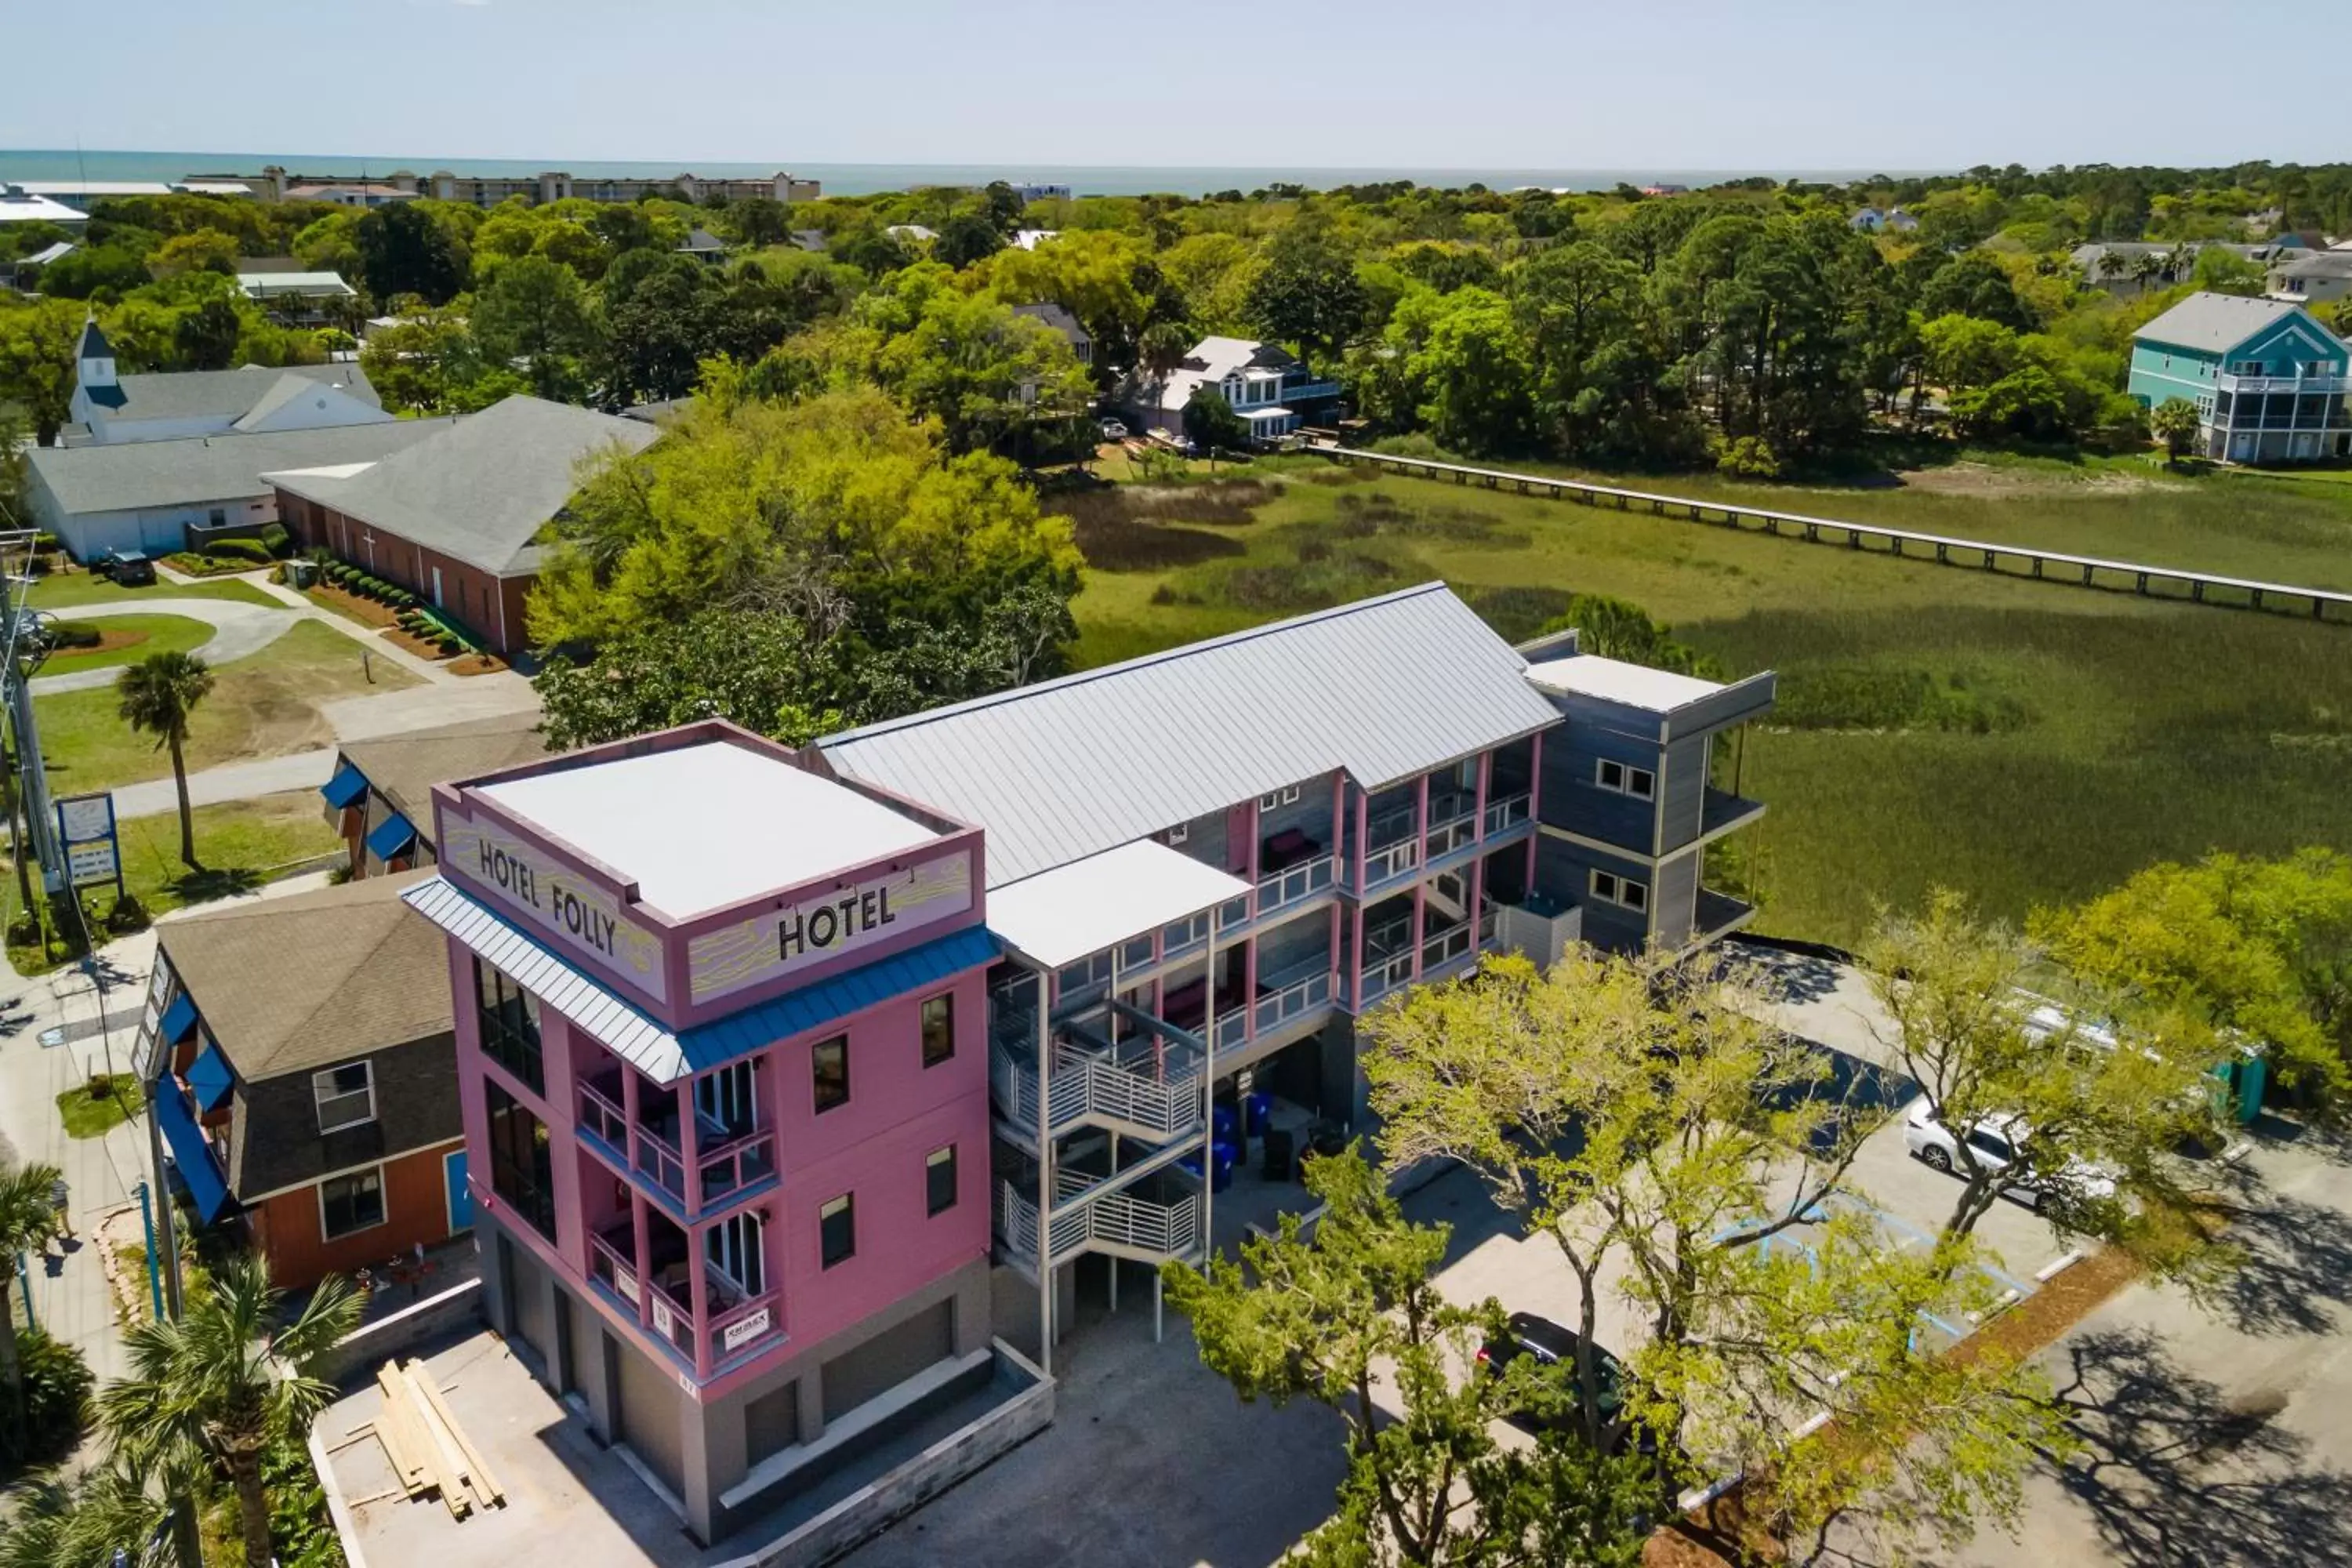 Bird's-eye View in NEW Completely Renovated Hotel Folly with Sunset Views